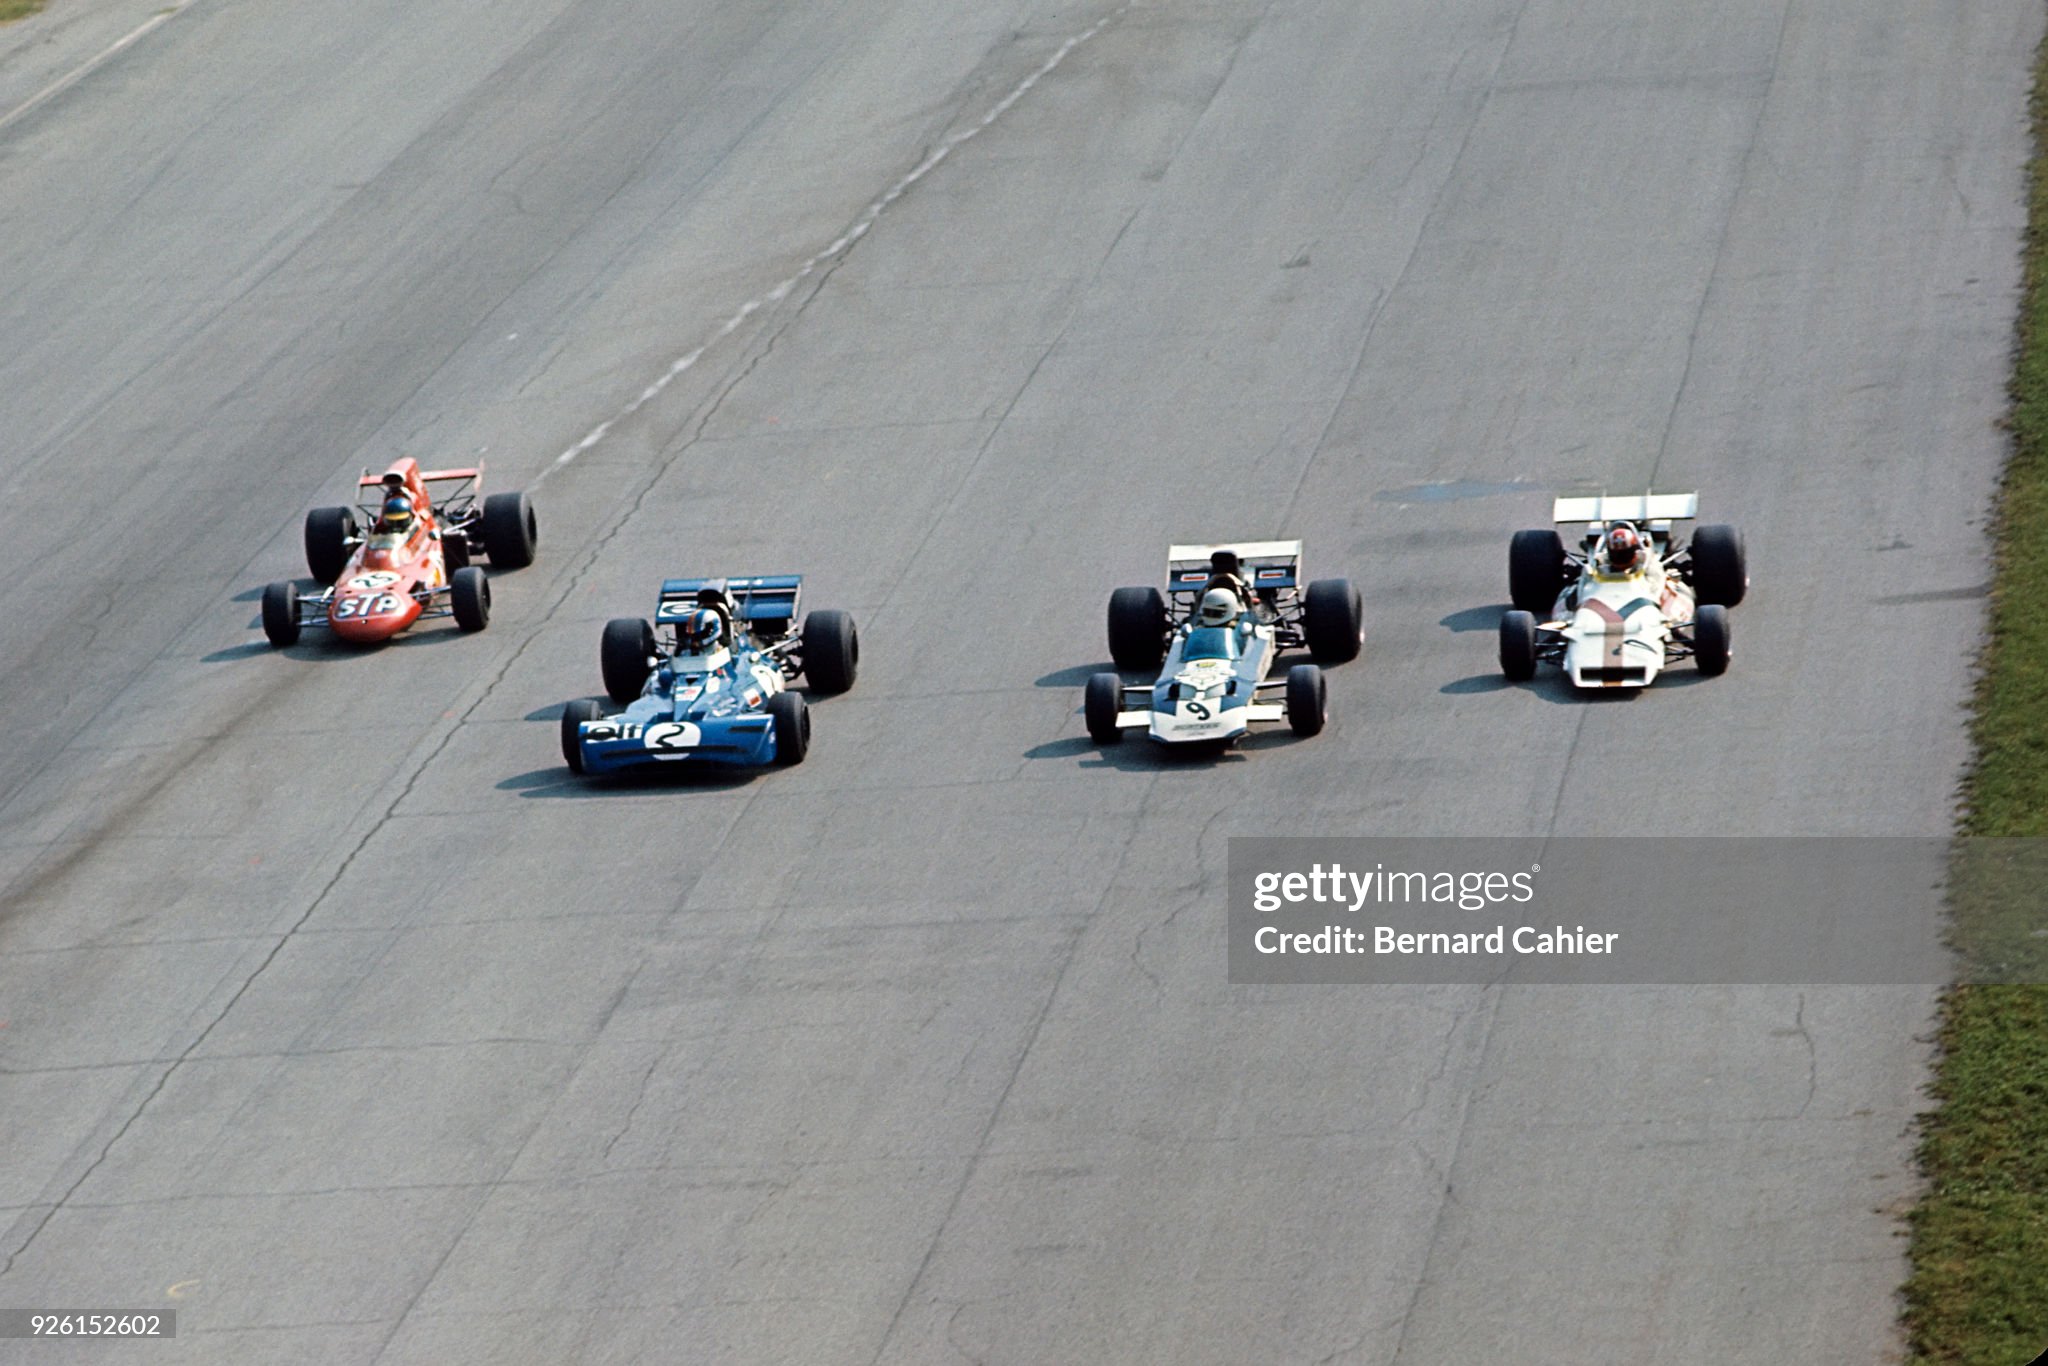 Ronnie Peterson, François Cevert, Mike Hailwood, Jo Siffert, March-Ford 711, Tyrrell-Ford 002, Surtees-Ford TS9, BRM P160, Grand Prix of Italy, Autodromo Nazionale Monza, 05 September 1971. 